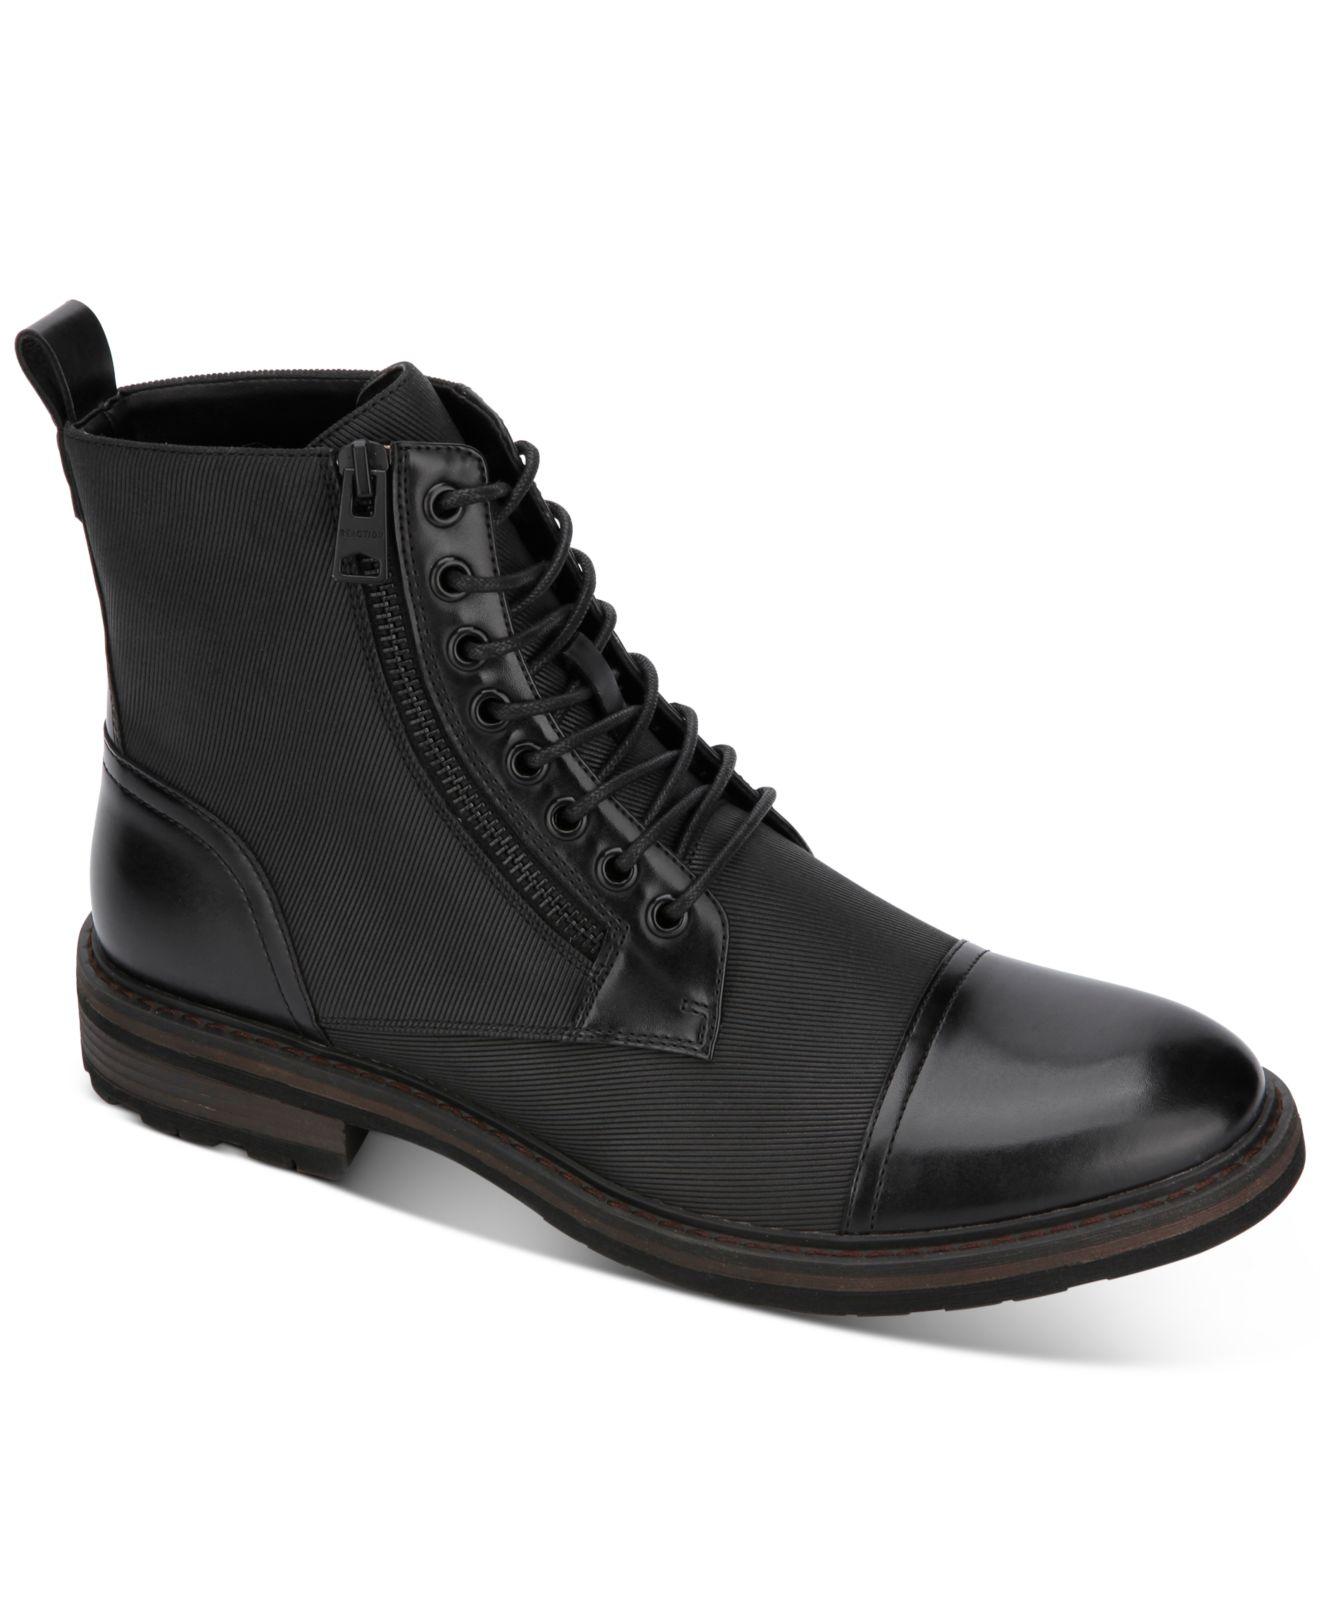 Kenneth Cole Reaction Lace-up Rex Boots in Black for Men - Lyst